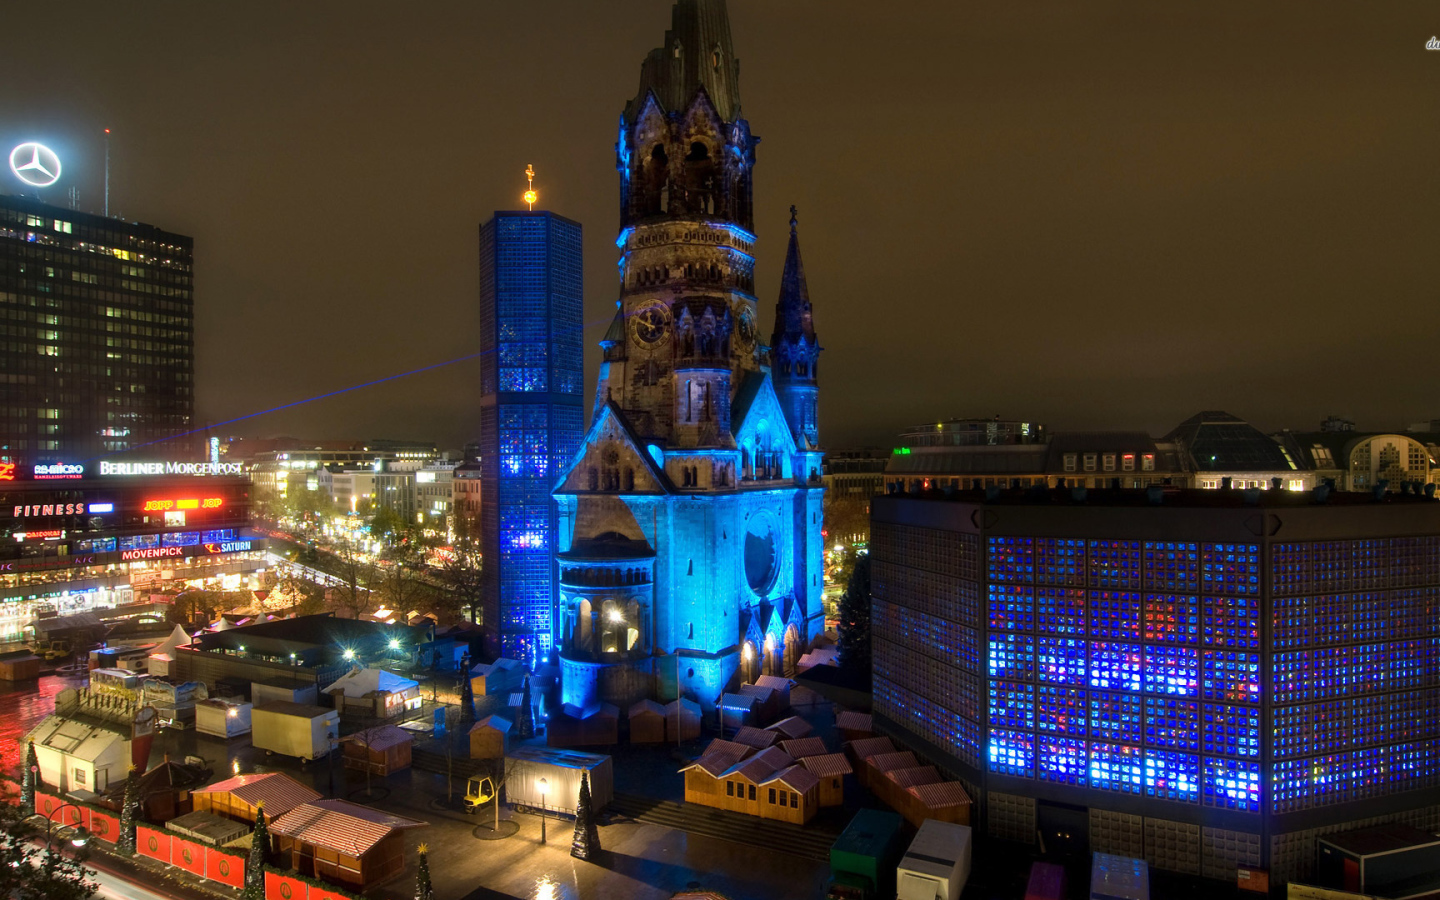 Night Cathedral in Berlin